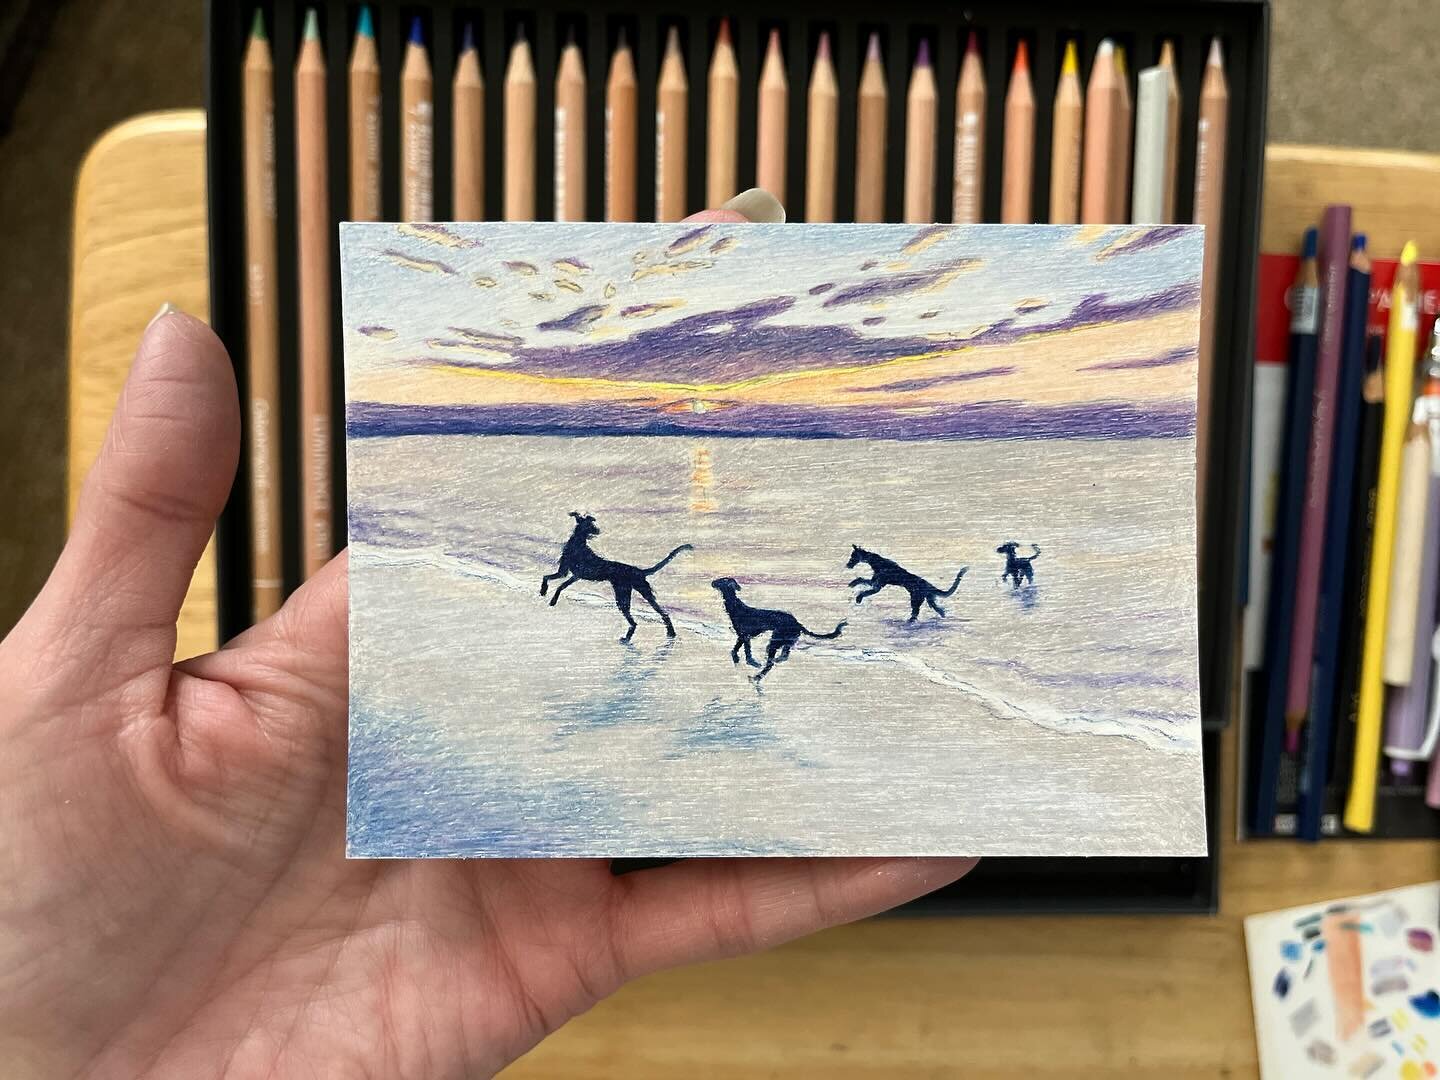 Beach dogs! A beautiful sunset and dogs at play! 🐾🧡🌅
This is a composition that I have done before, as a digital painting. I wanted to give it a go in colored pencil. 
I&rsquo;m not sure how I feel about it. It&rsquo;s okay. The colored pencils wi